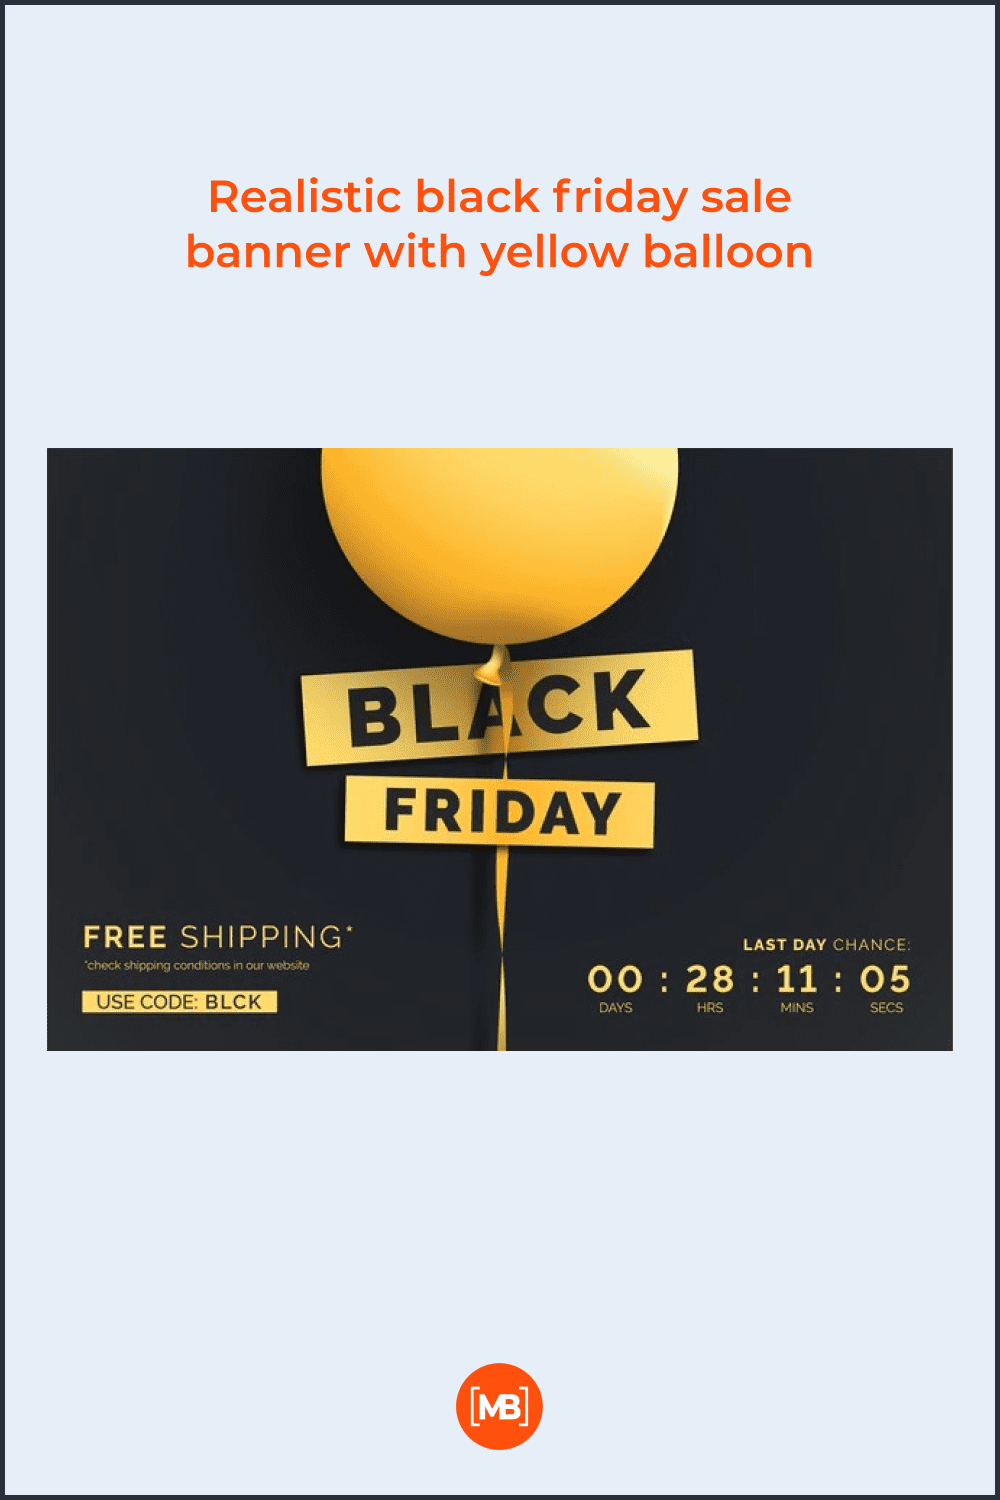 Realistic Black Friday sale banner with yellow balloon.